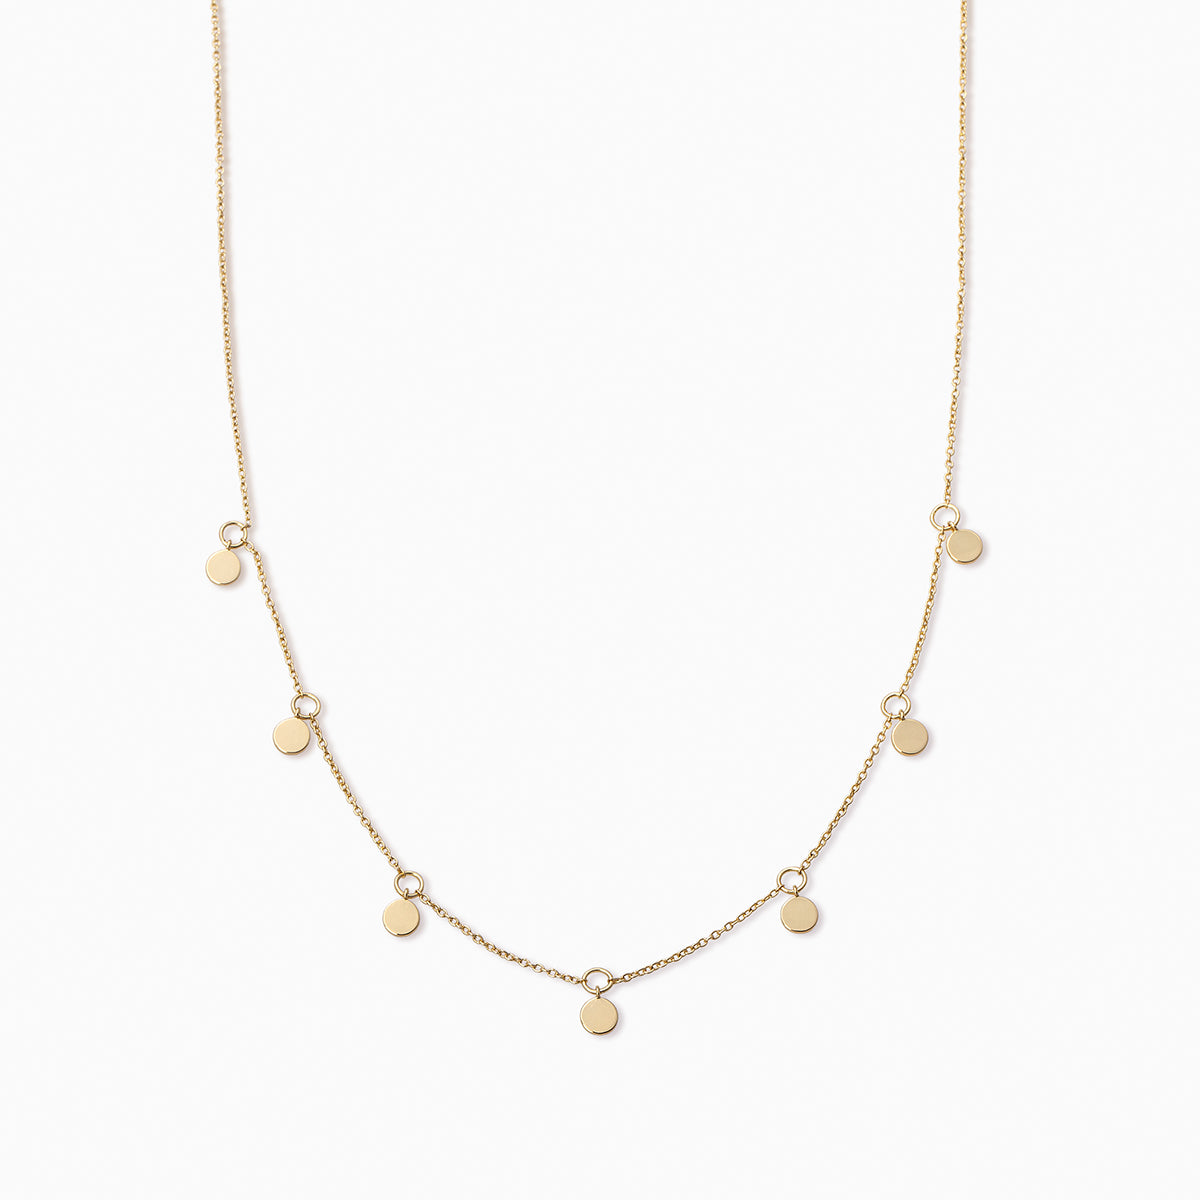 Poppy Necklace | Gold | Product Image | Uncommon James